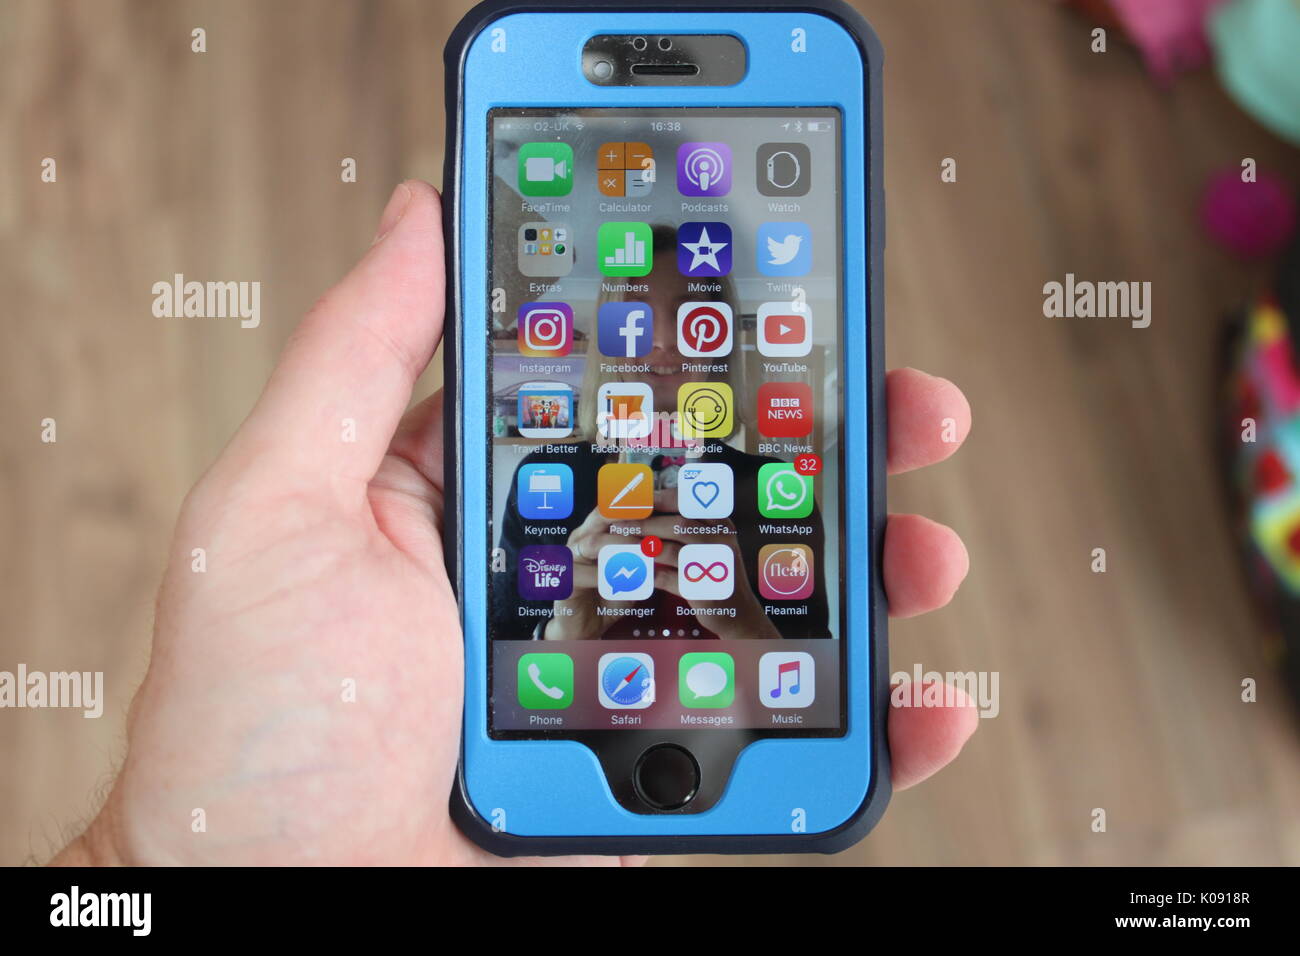 iPhone with a protective blue cover from Anker held in a mans hand showing apps and notifications on the screen Stock Photo